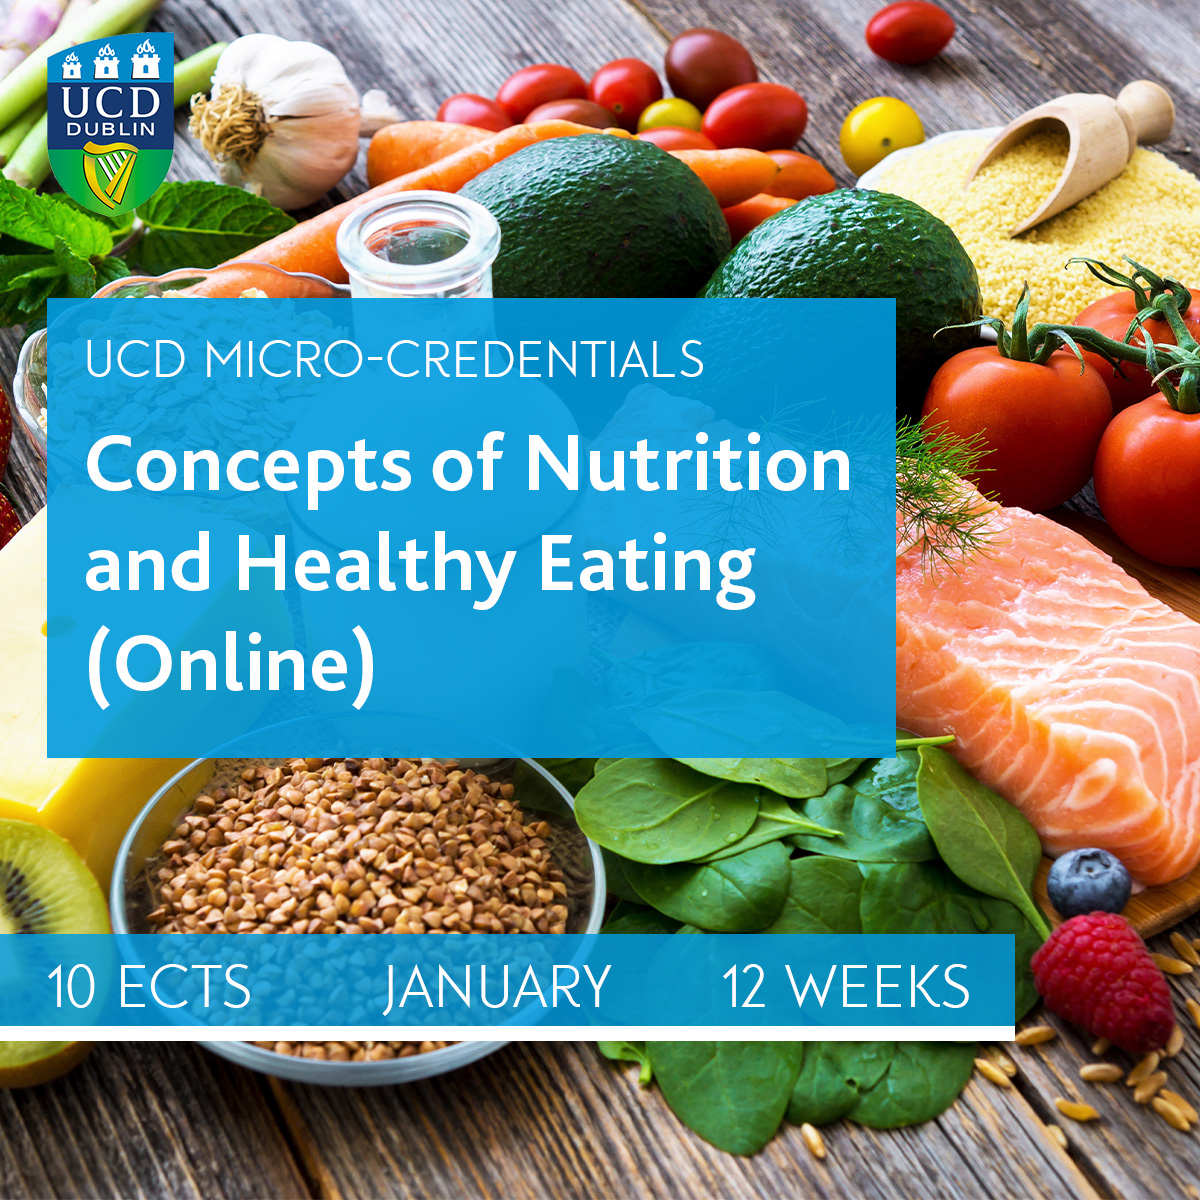 Explore the role of nutrition in health promotion, disease prevention, and sustainable diets with our #microcredential in Concepts of Nutrition and Healthy Eating; lnkd.in/eTnYN_jS
 
#health #sustainablediets #irishfood